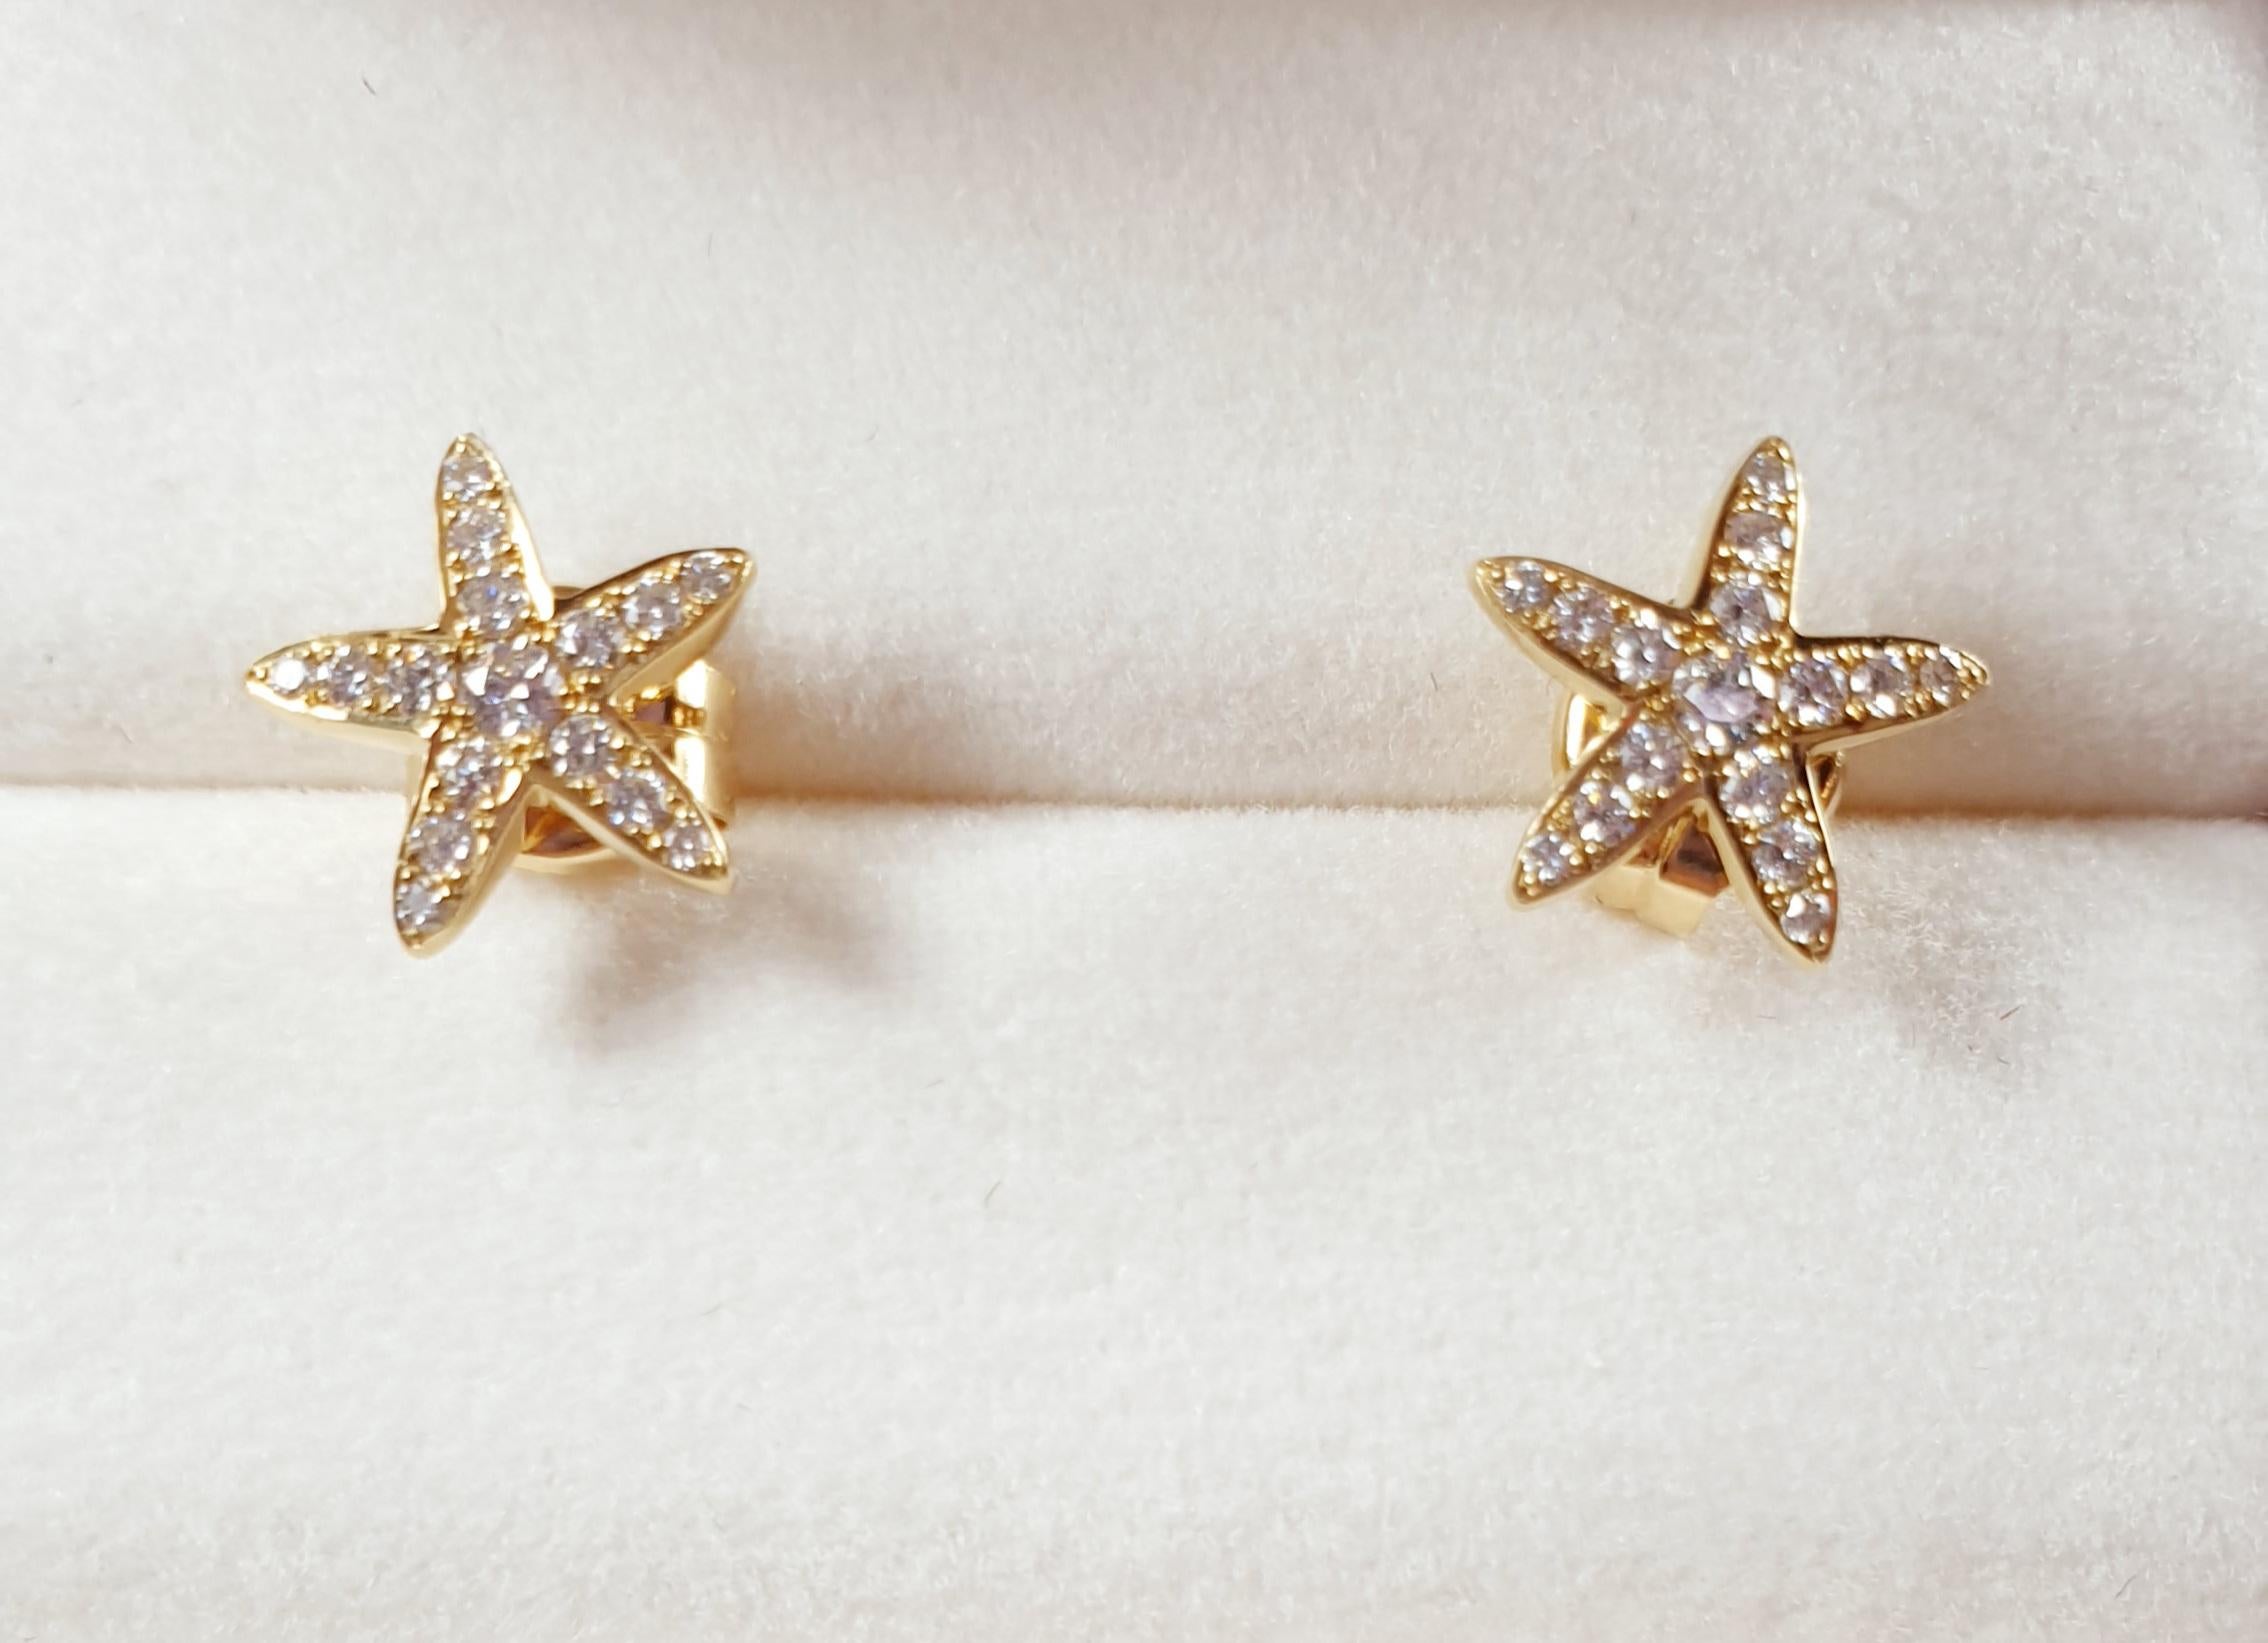 Sea Star collection, inspired in the Mediterranean sea colours...
Options 2 colours yellow and white gold
◘ Every Irama Pradera Jewels creation is handmade
◘ 15 -0.01ct and 1 -0.025ct total 0.175ct white Diamonds (VS, G-H)
◘ Fair trade diamonds 
◘